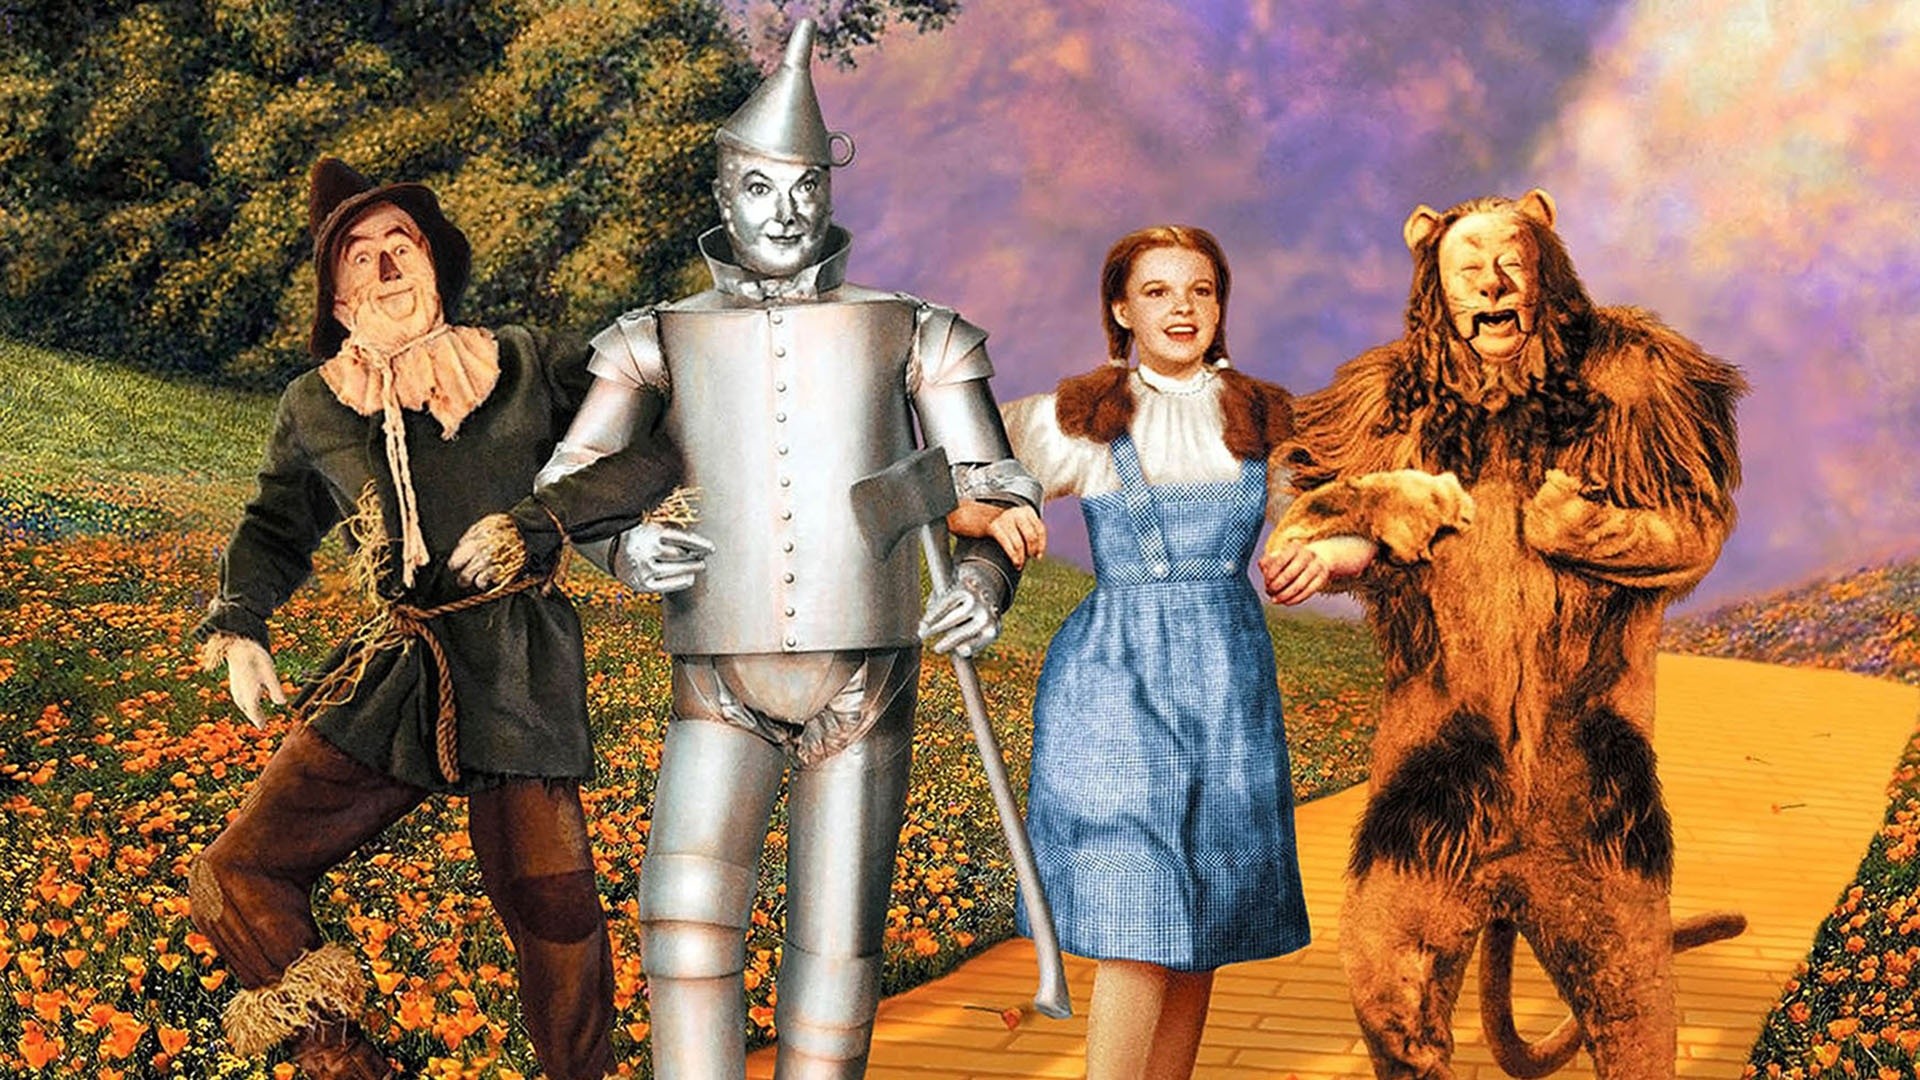 The Wizard of Oz' To Hit Theaters This June To Honor Judy